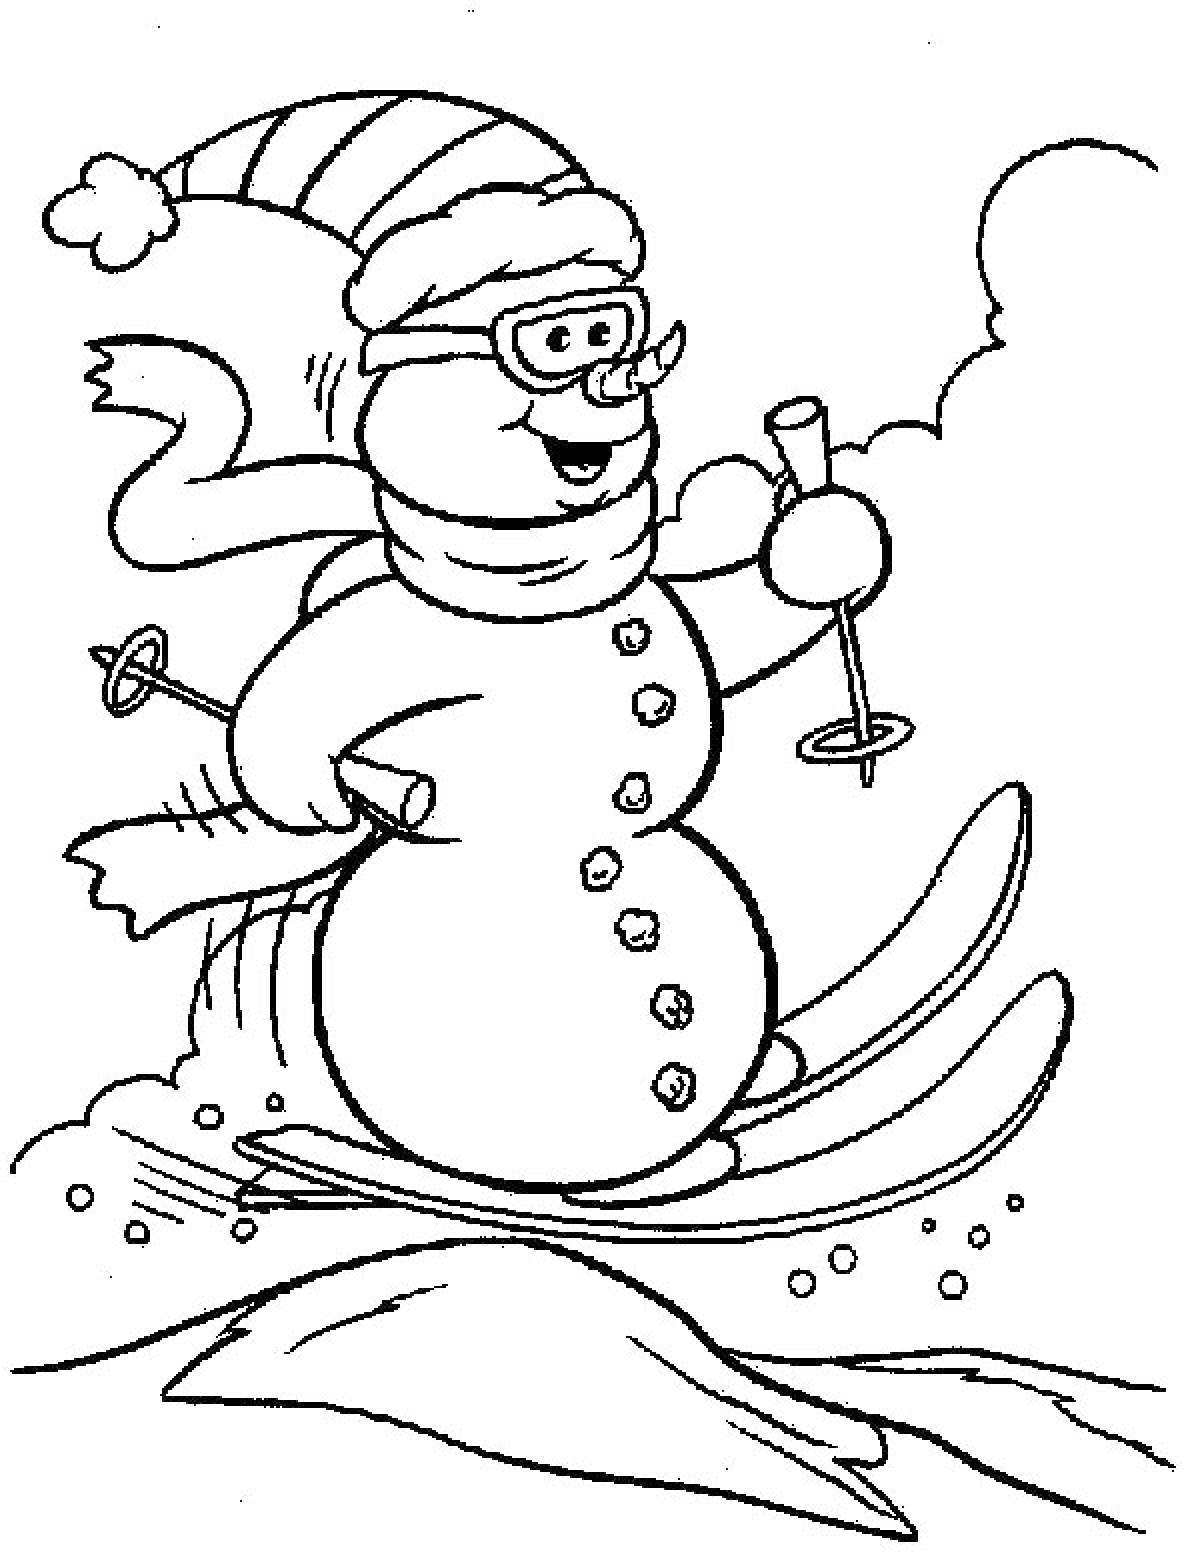 Snowman with glasses